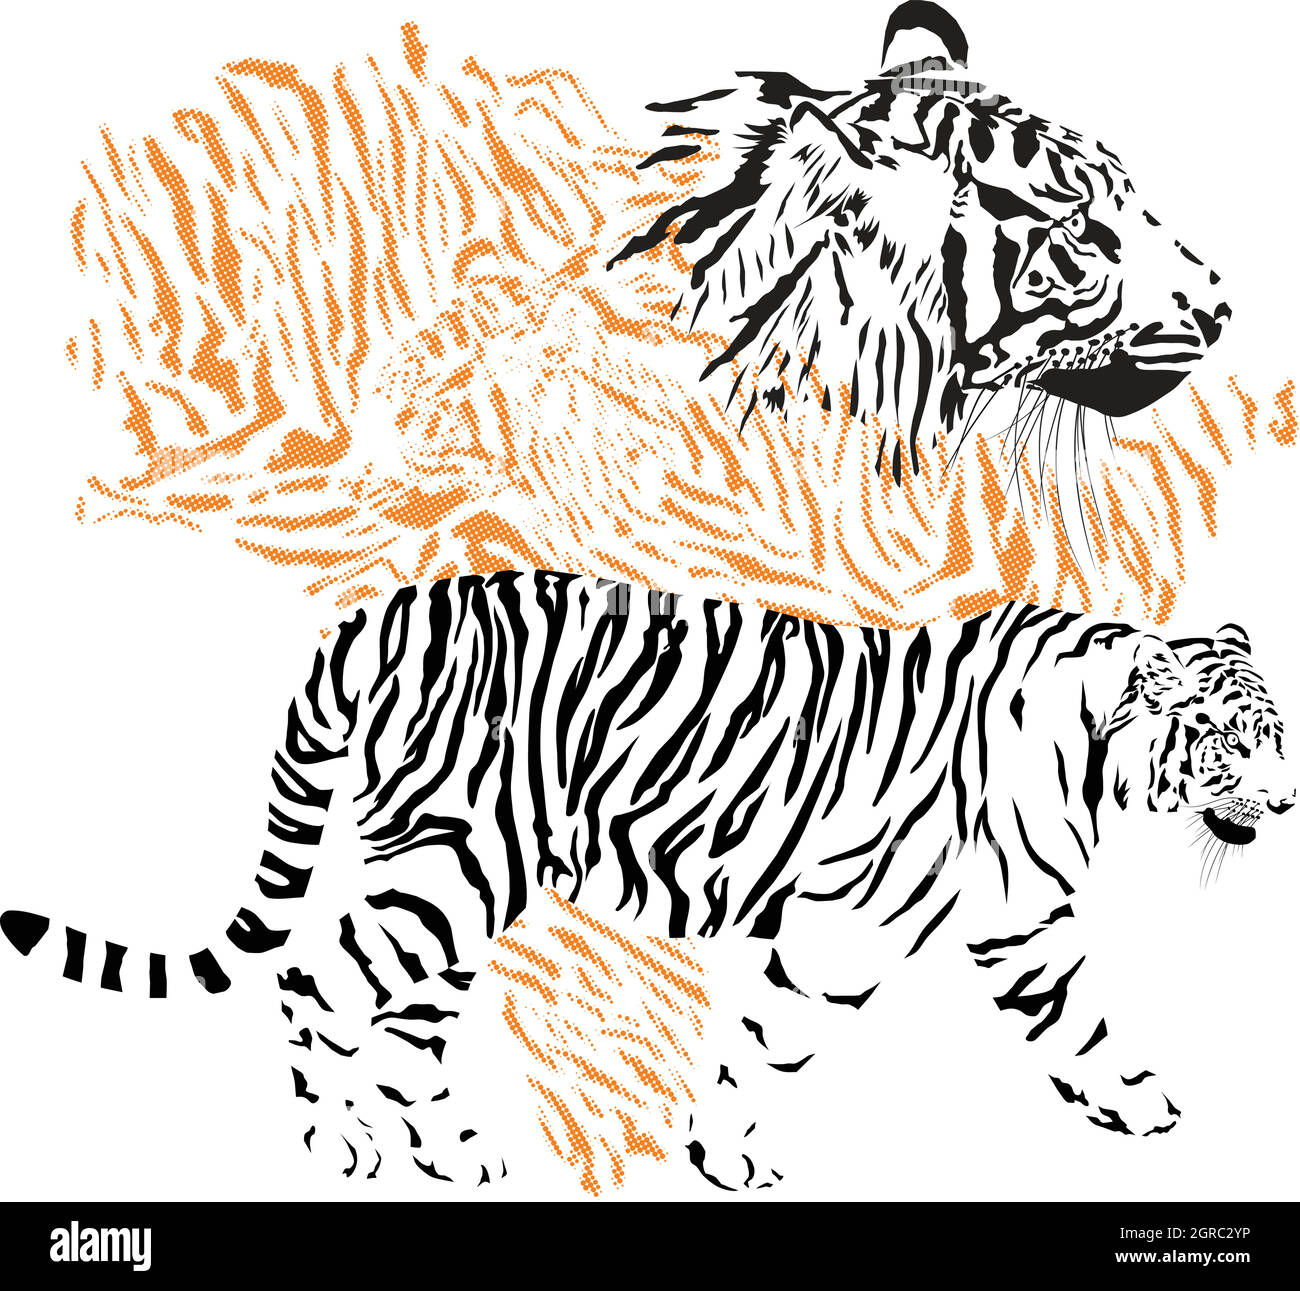 Tiger - The Heart of India Drawing by Vishvesh Tadsare - Pixels